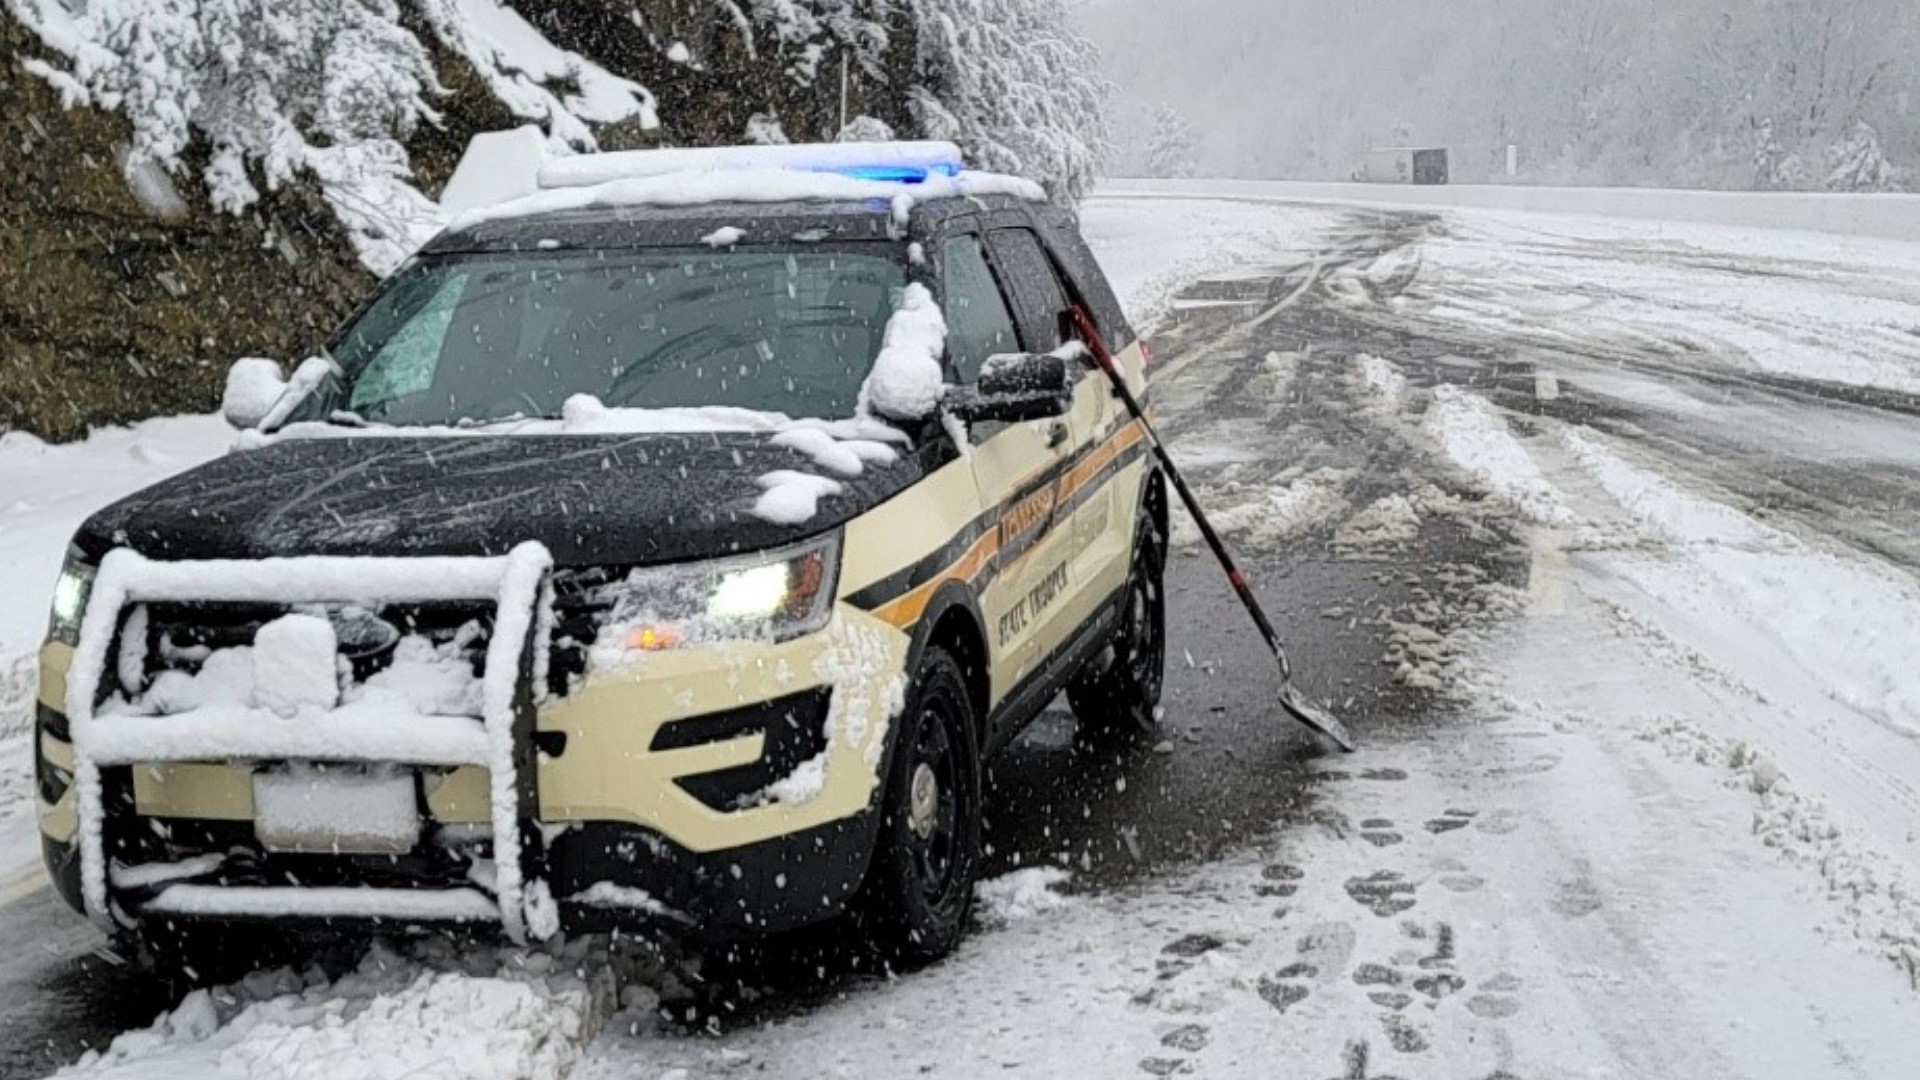 When semi-trucks and cars stalled out, Anderson County Trooper Jacob Wiser literally grabbed a shovel and started digging people out to keep traffic moving.